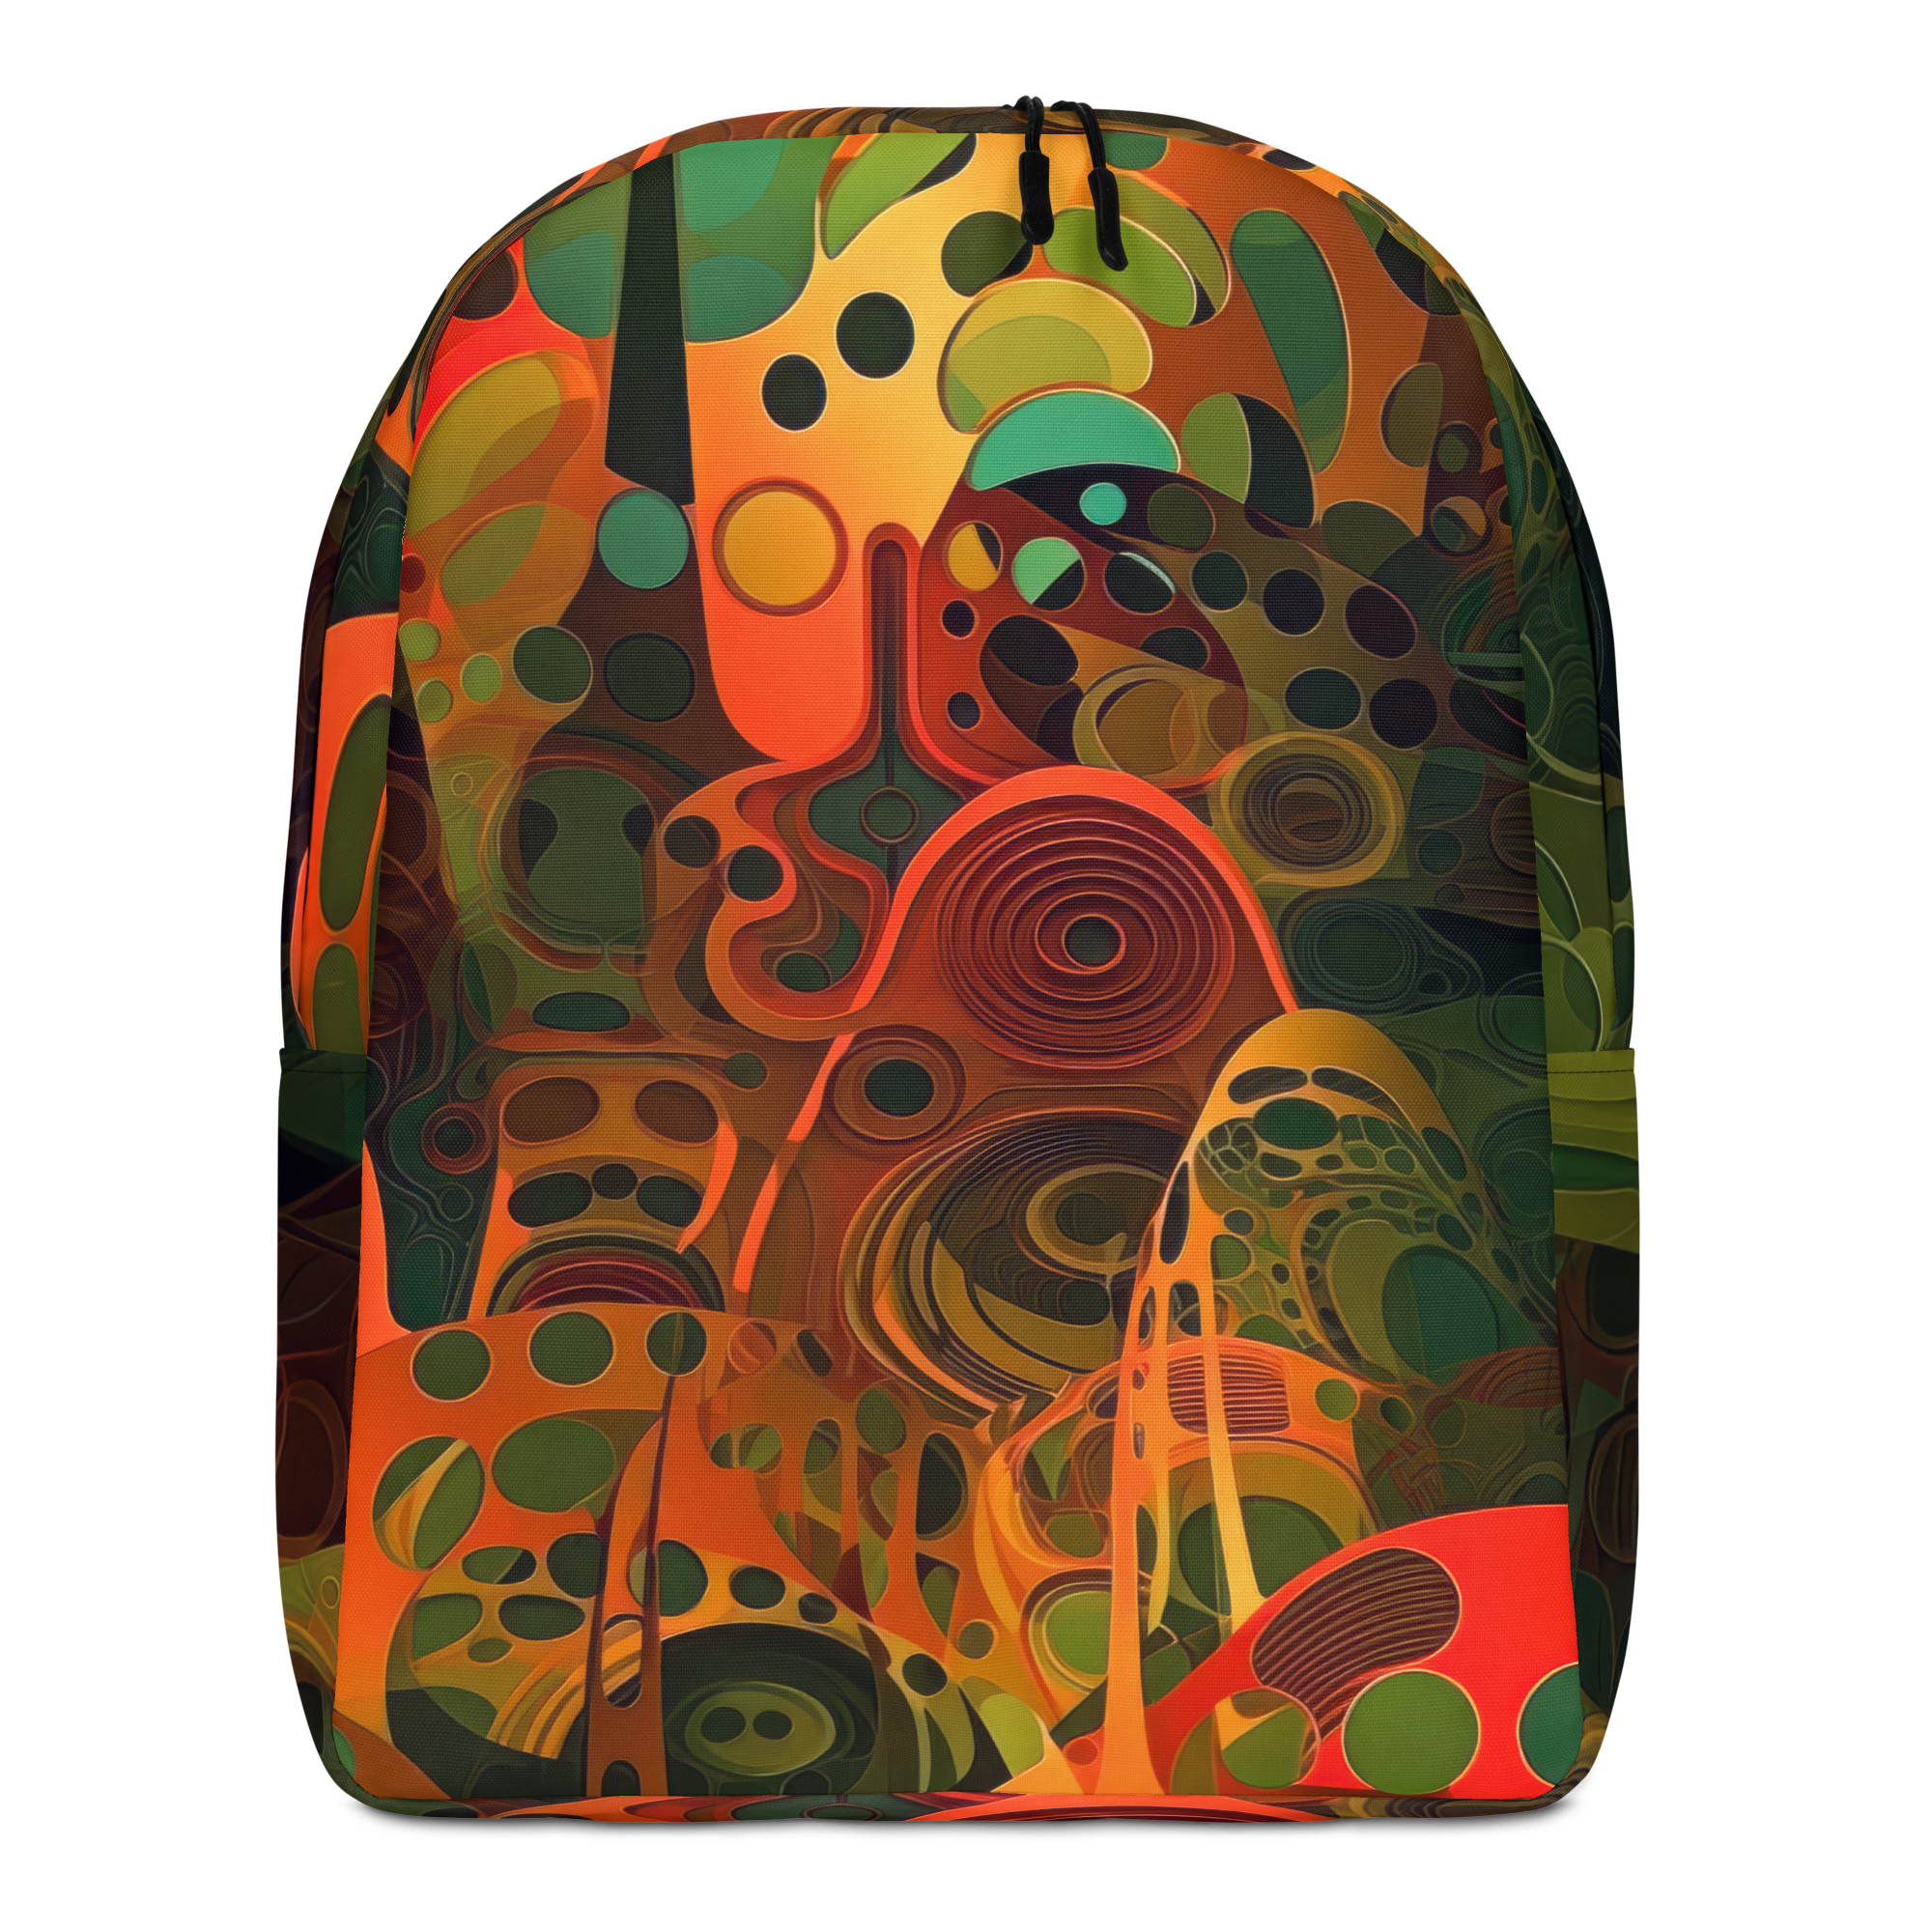 "DIVERSITY DAY" - African American Themed Backpack with Laptop Pocket